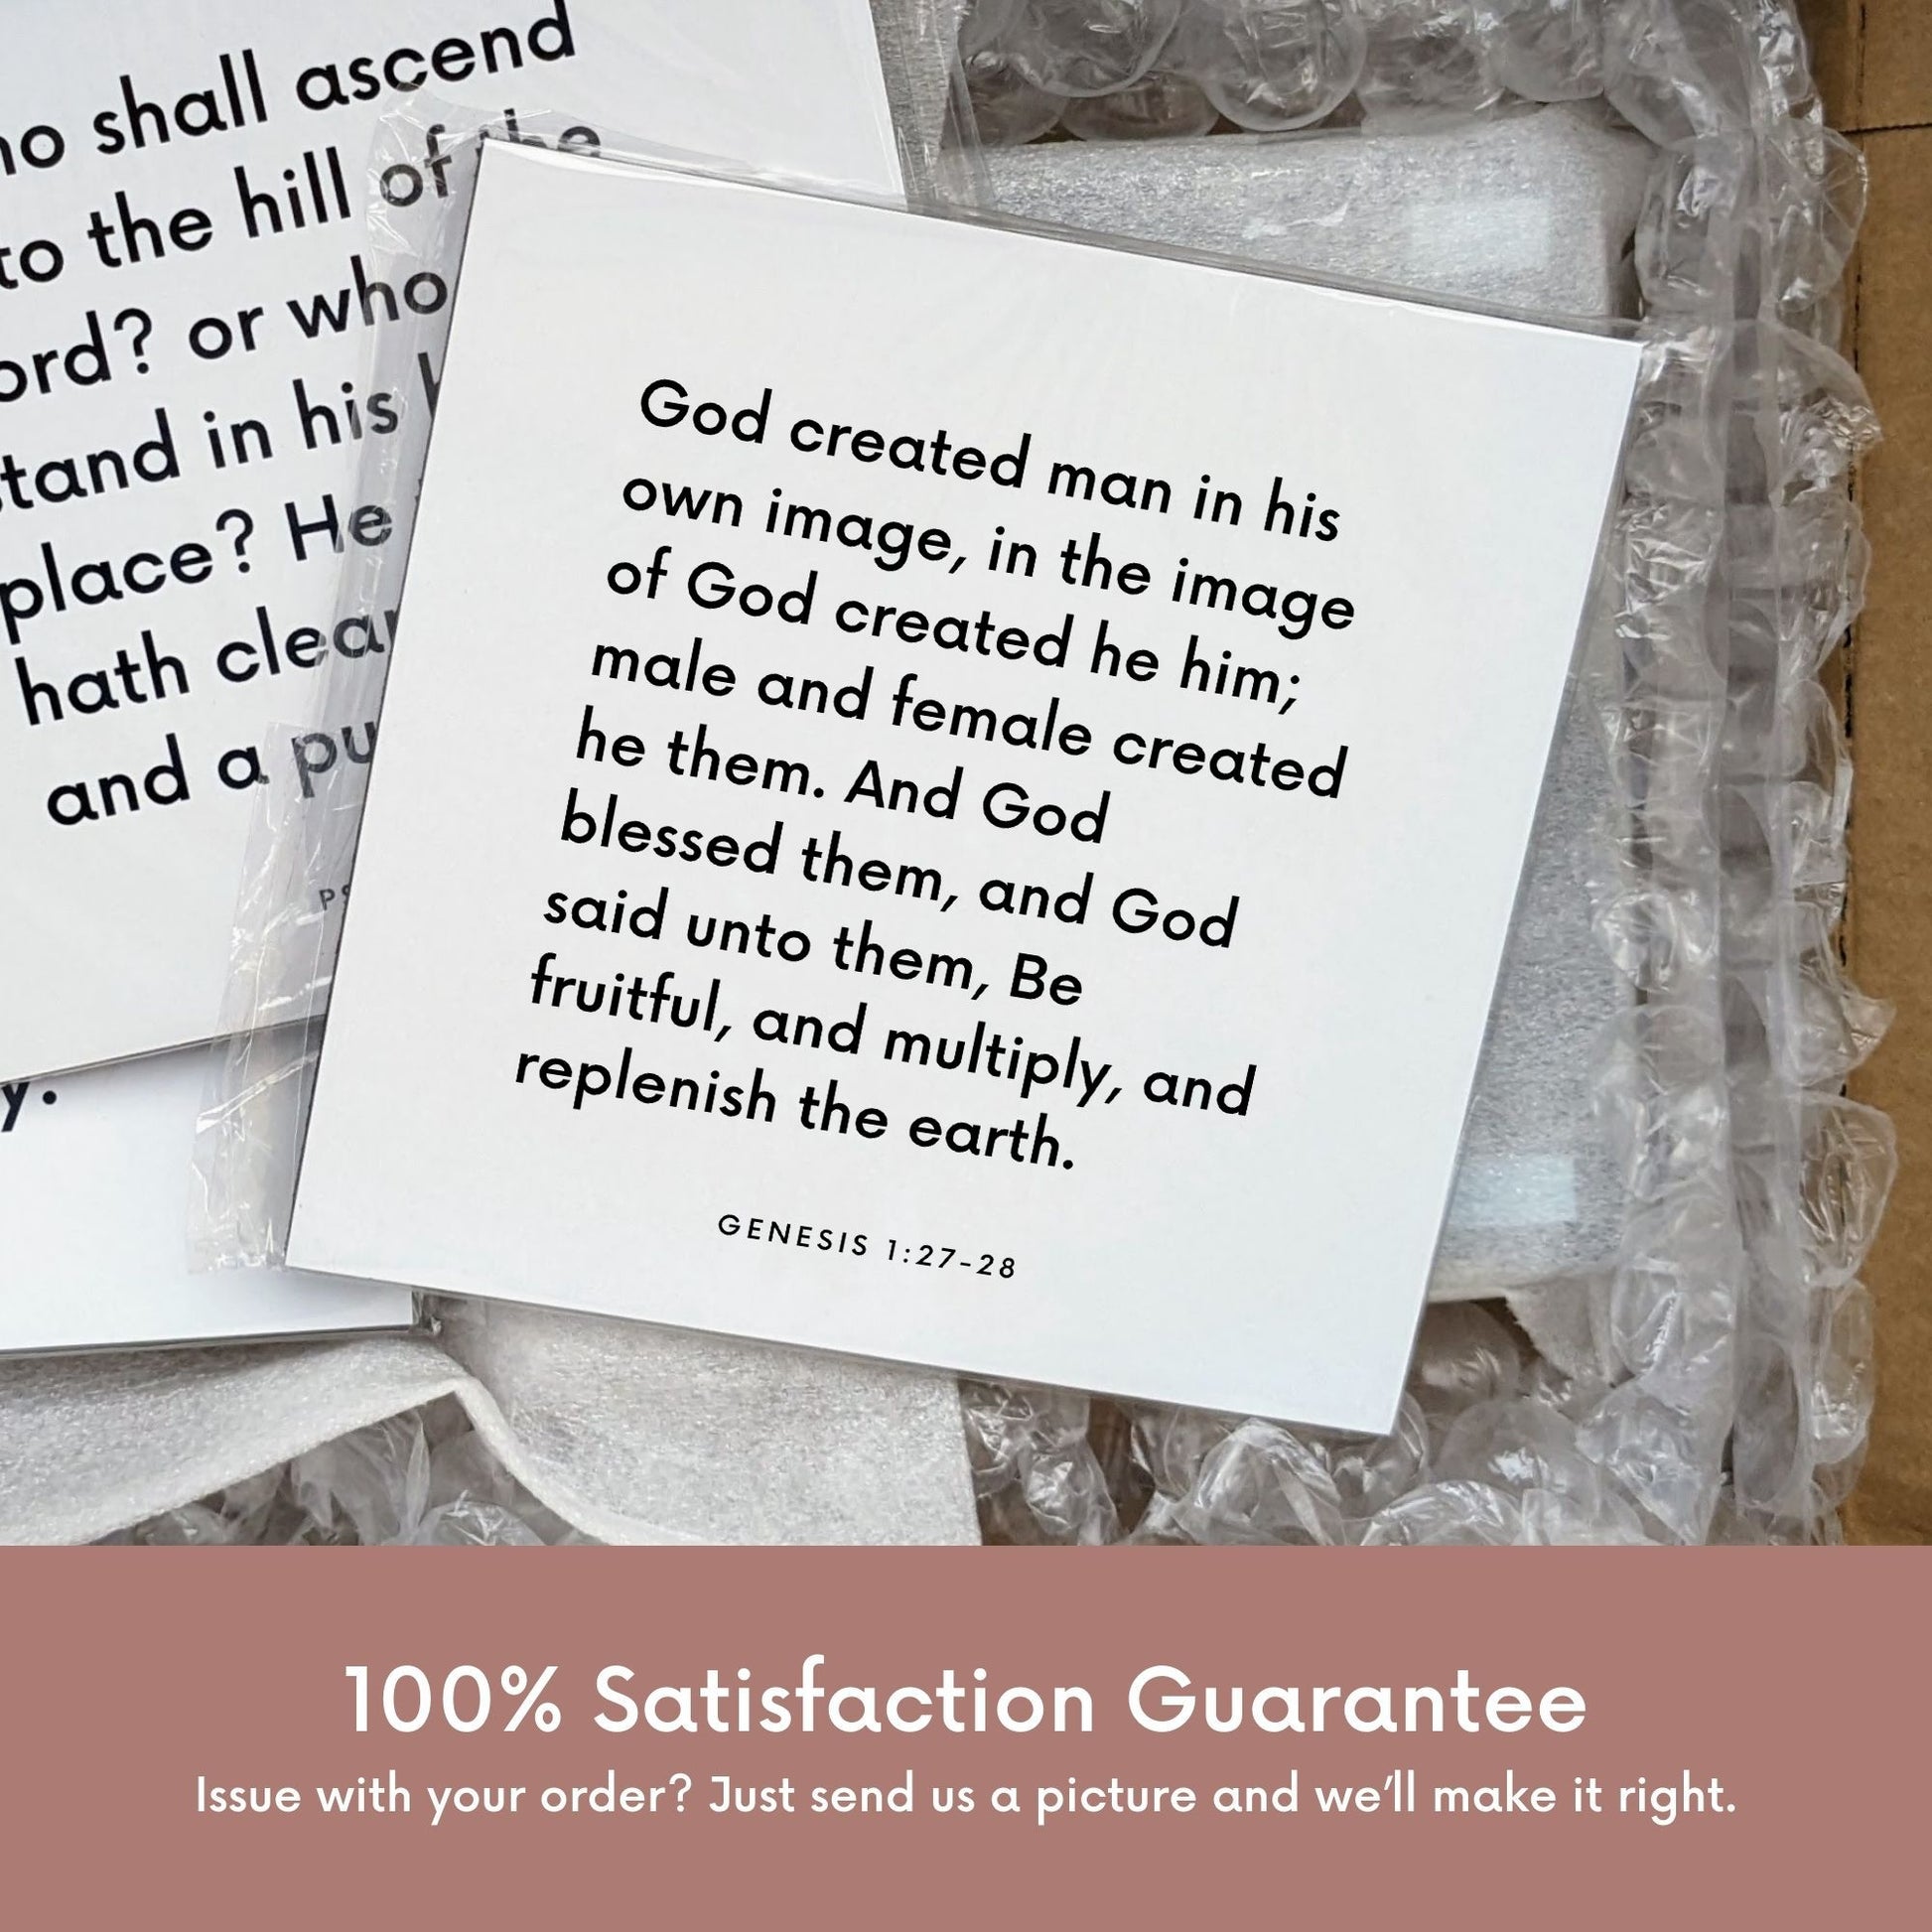 Shipping materials for scripture tile of Genesis 1:27-28 - "God created man in his own image"